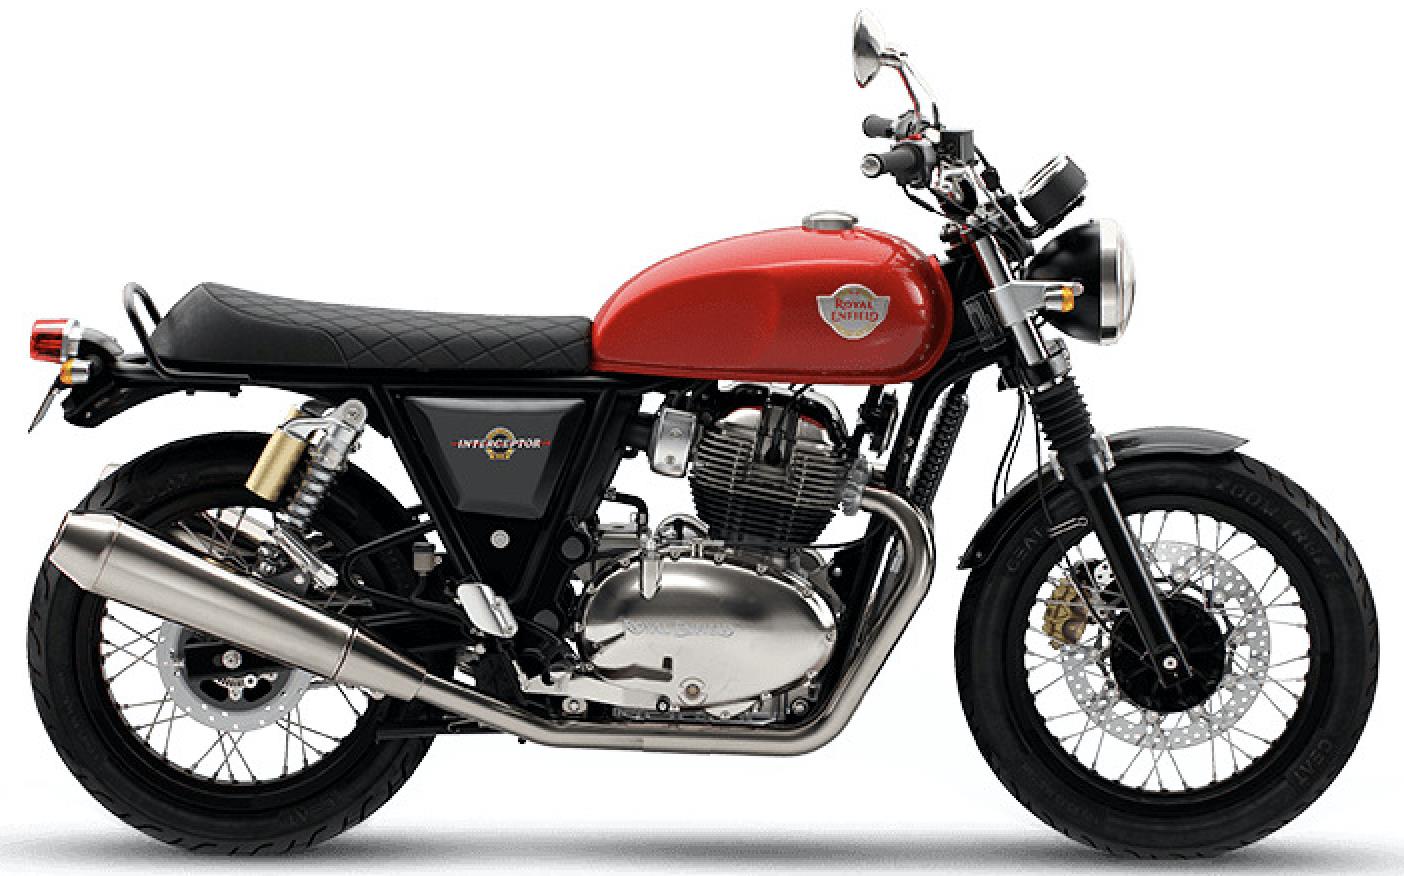 2021 Royal Enfield Interceptor 650 Specs and Price in India